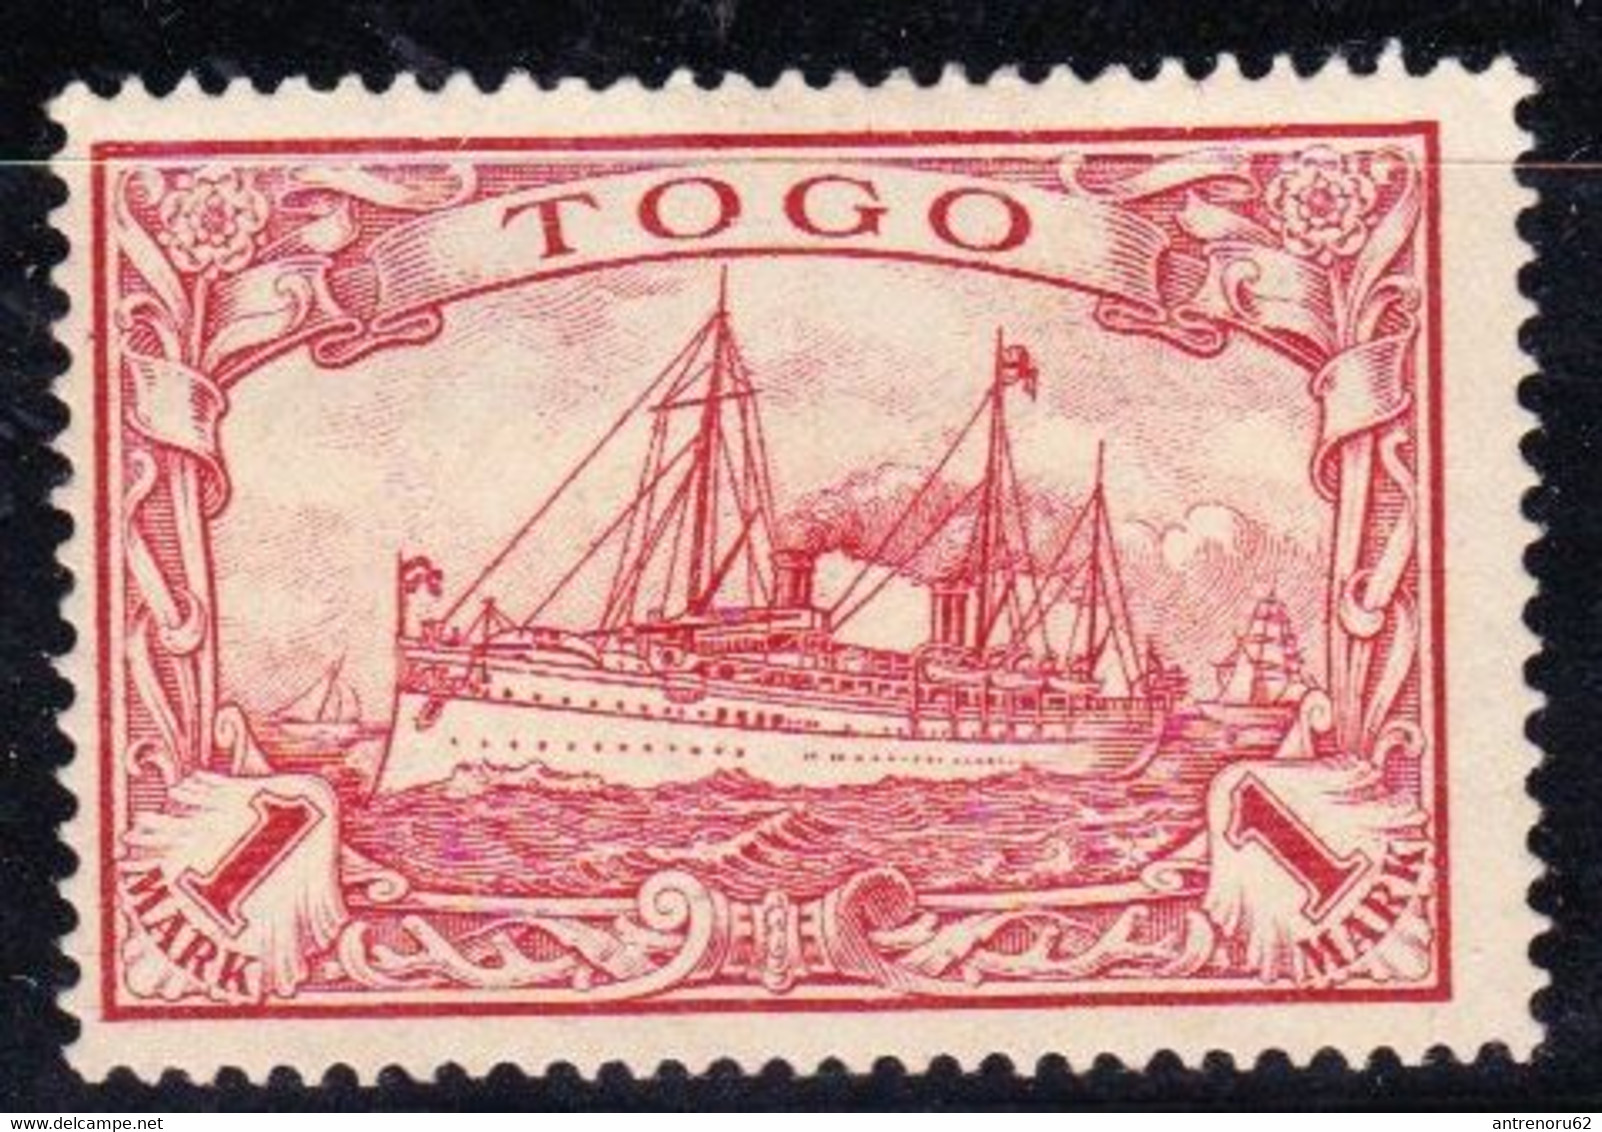 STAMPS-COLONY-TOGO-1900-UNUSED-MH*-SEE-SCAN - Togo